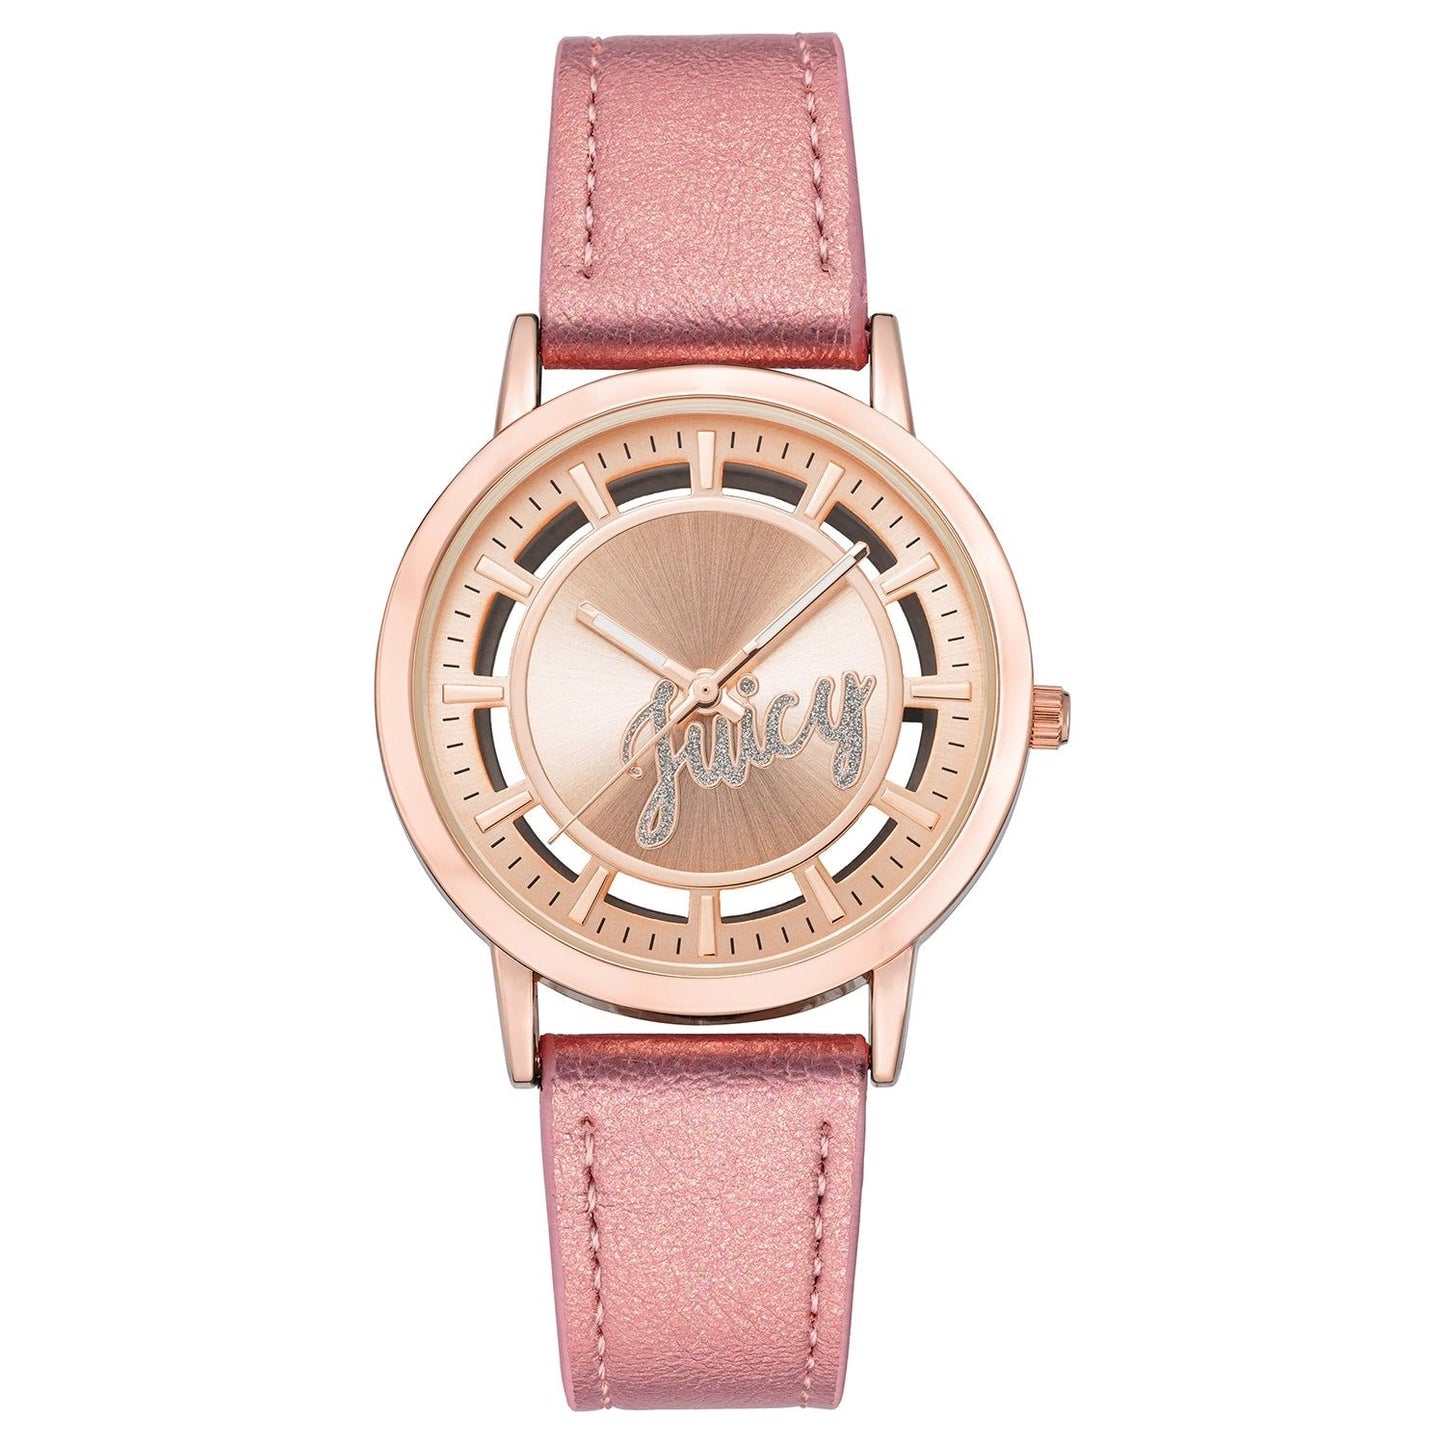 JUICY COUTURE JUICY COUTURE MOD. JC_1214RGPK WATCHES juicy-couture-mod-jc_1214rgpk